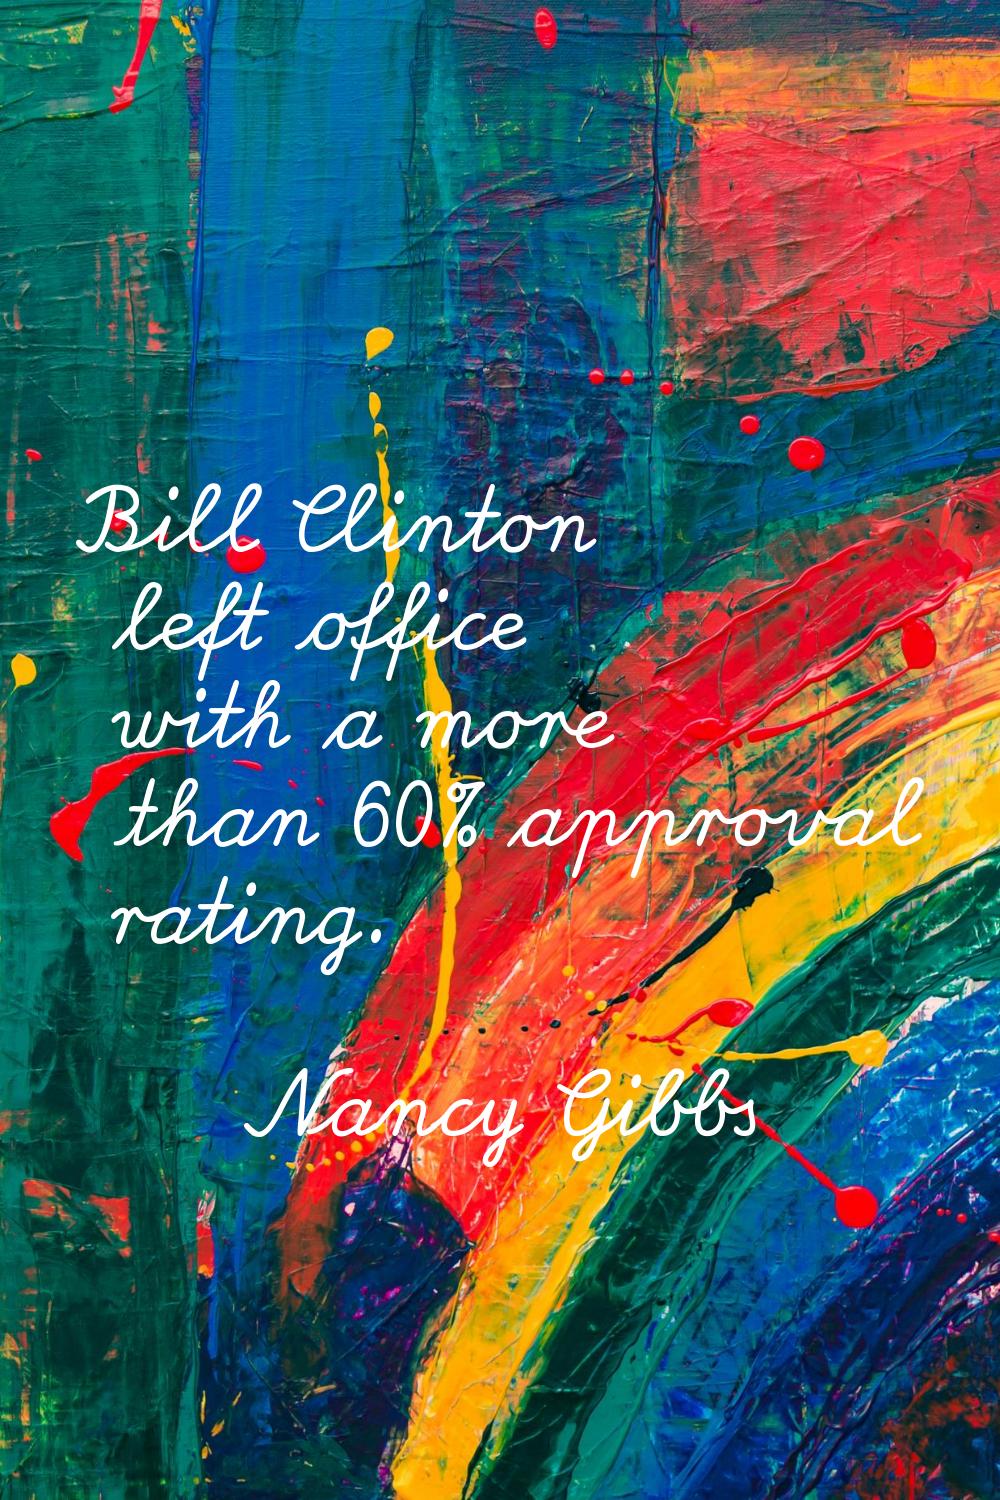 Bill Clinton left office with a more than 60% approval rating.